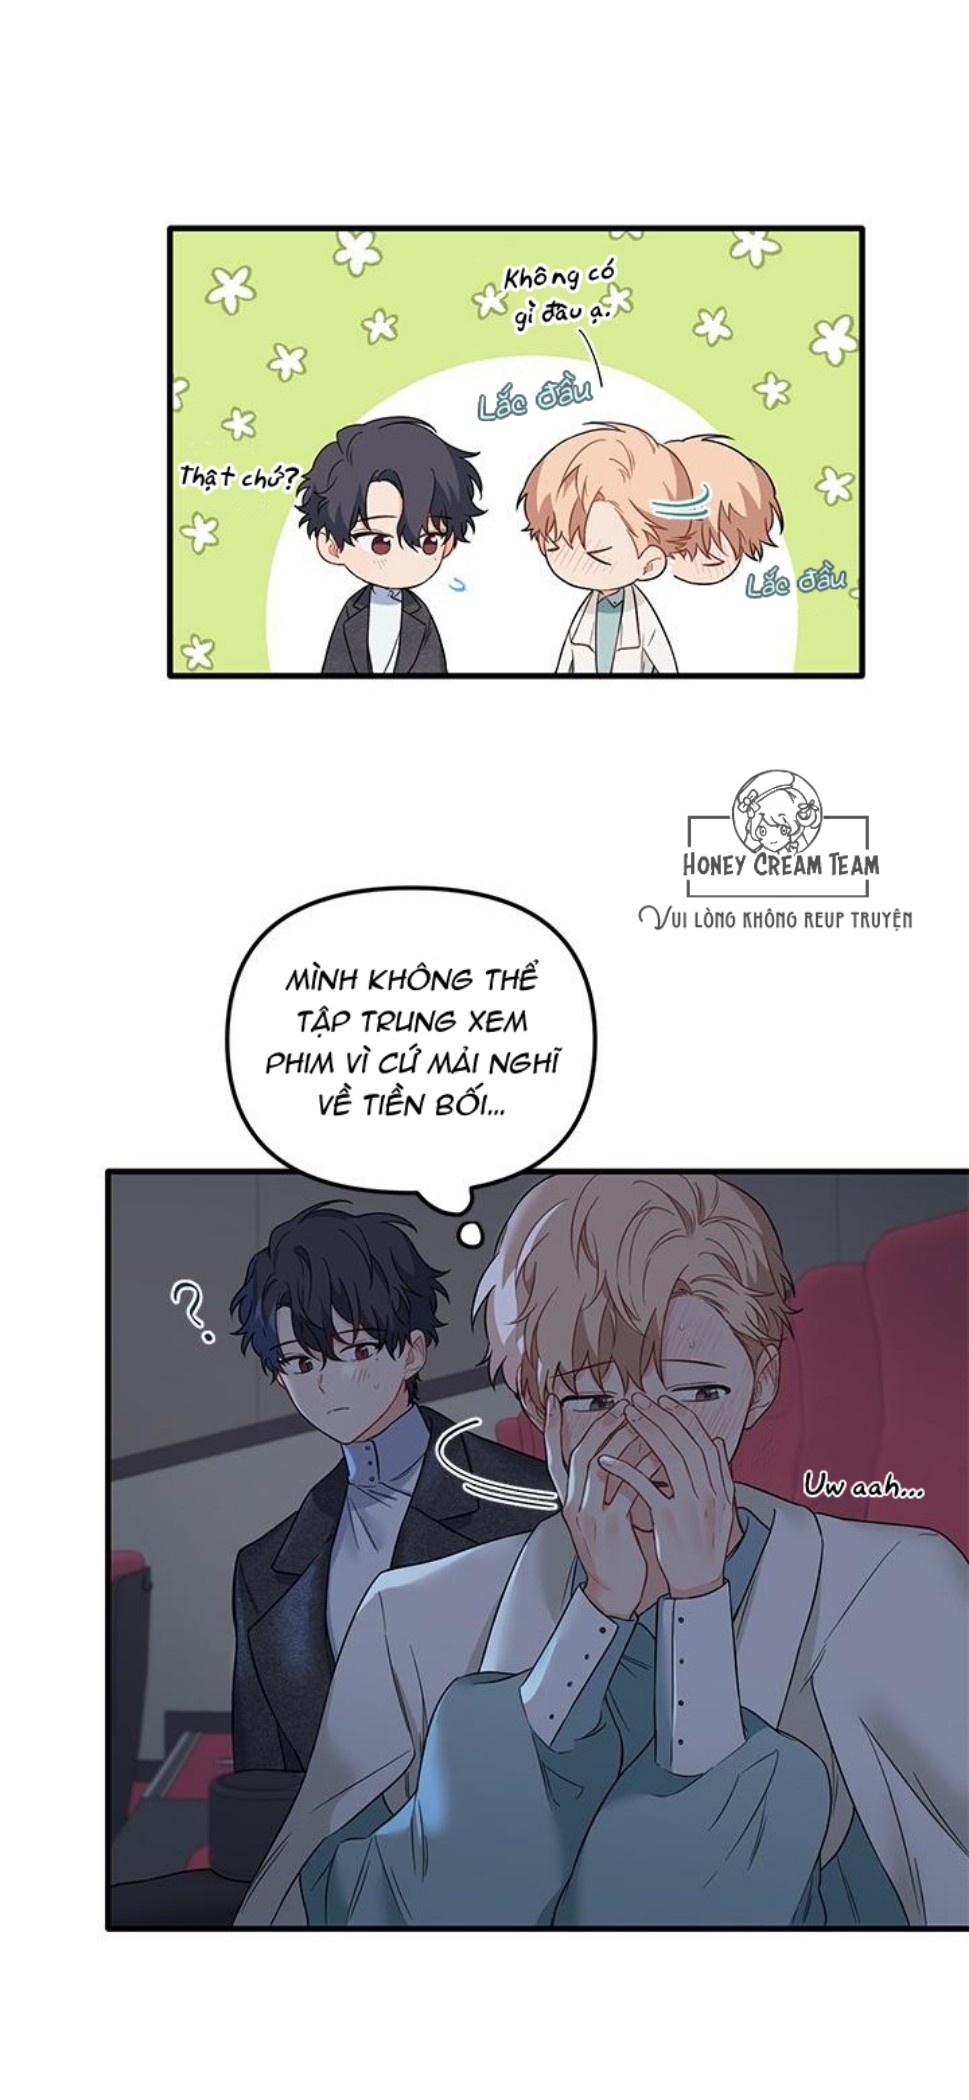 blood-and-love-chap-26-8